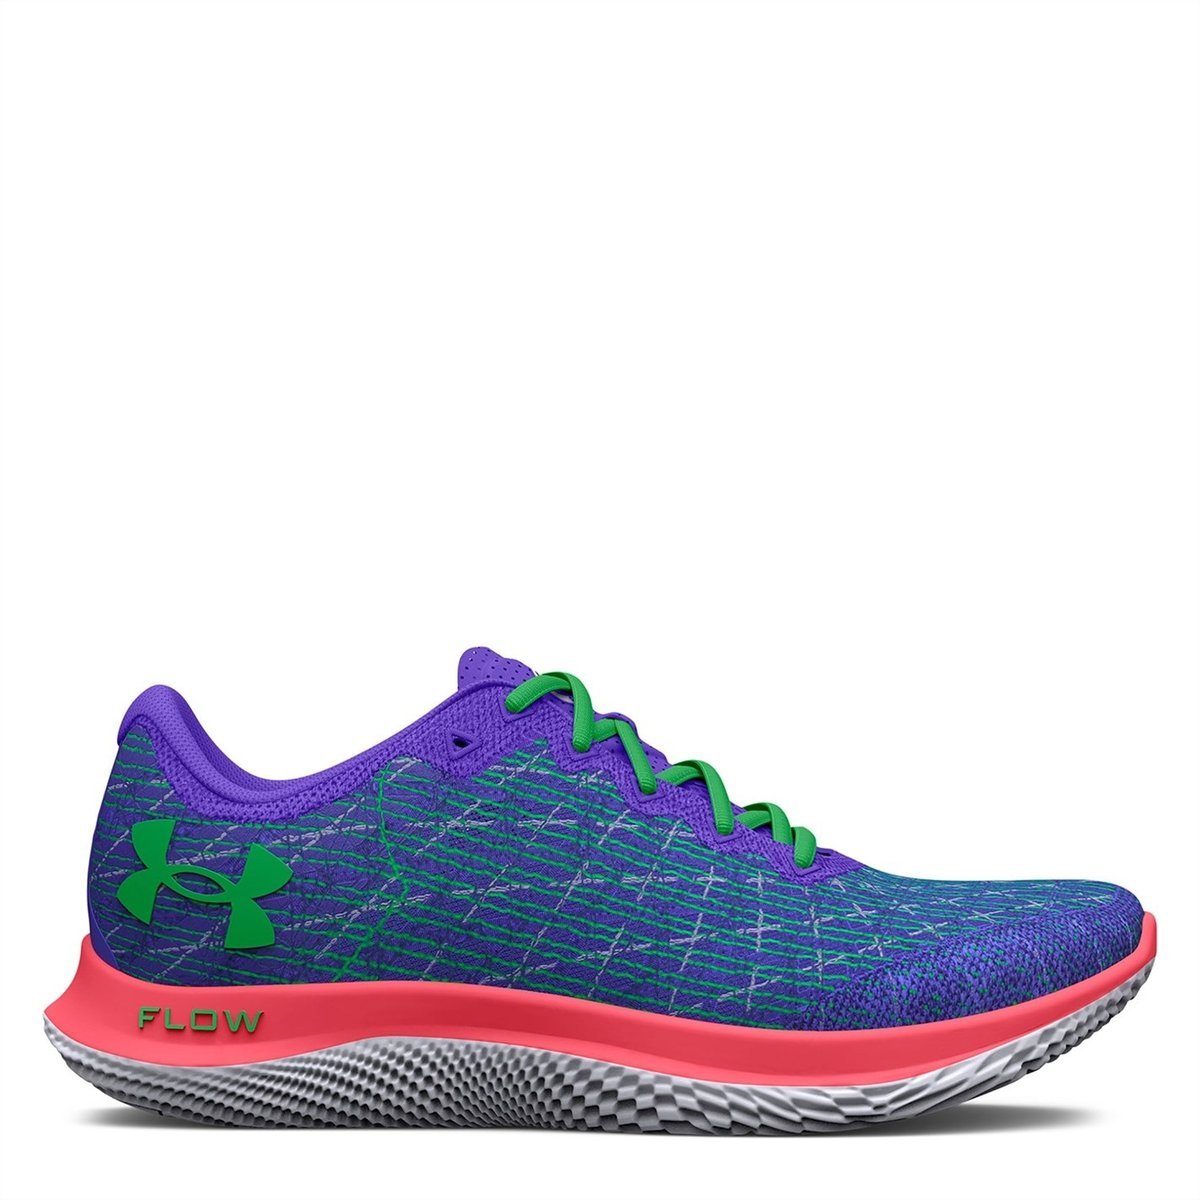 Under Armour Running Shoes - Lovell Sports